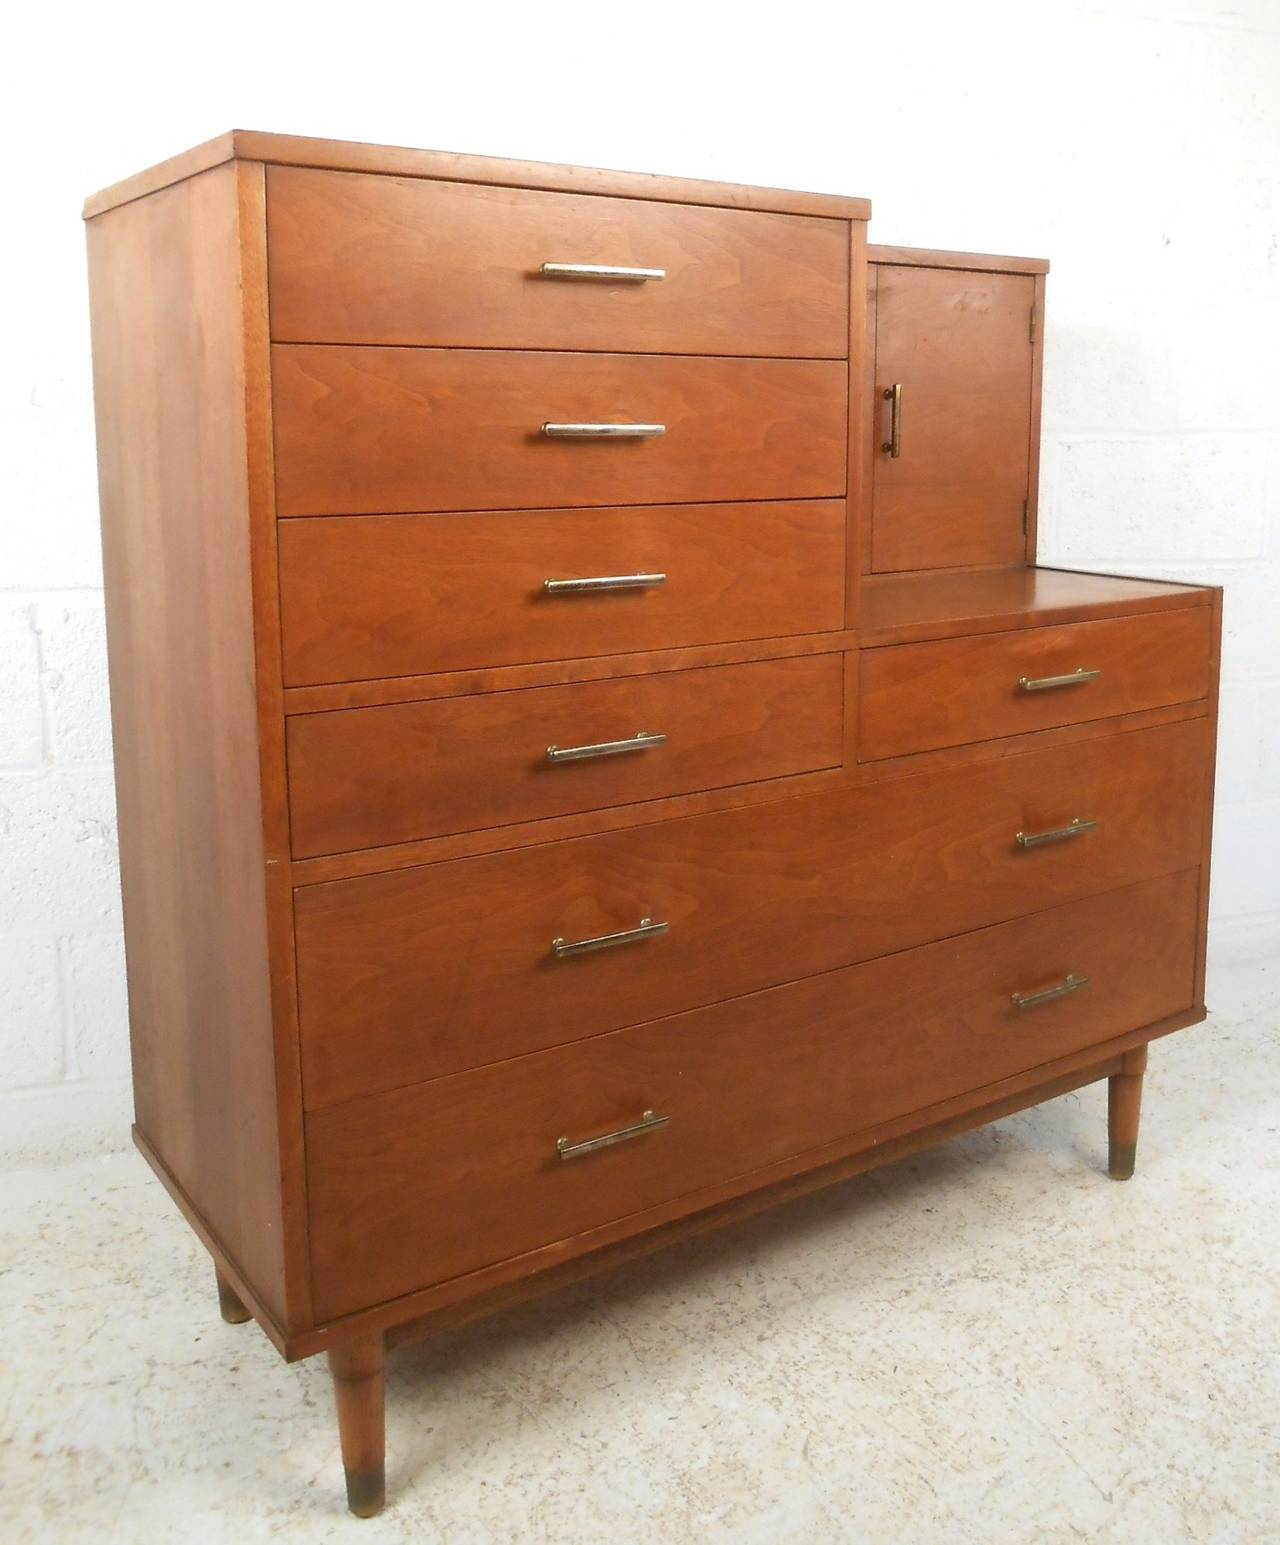 This wonderful dresser combines a variety of storage options with a built in hide-away vanity. Mid-Century drexel construction includes dovetailed drawers and unique pulls. Please confirm item location (NY or NJ).